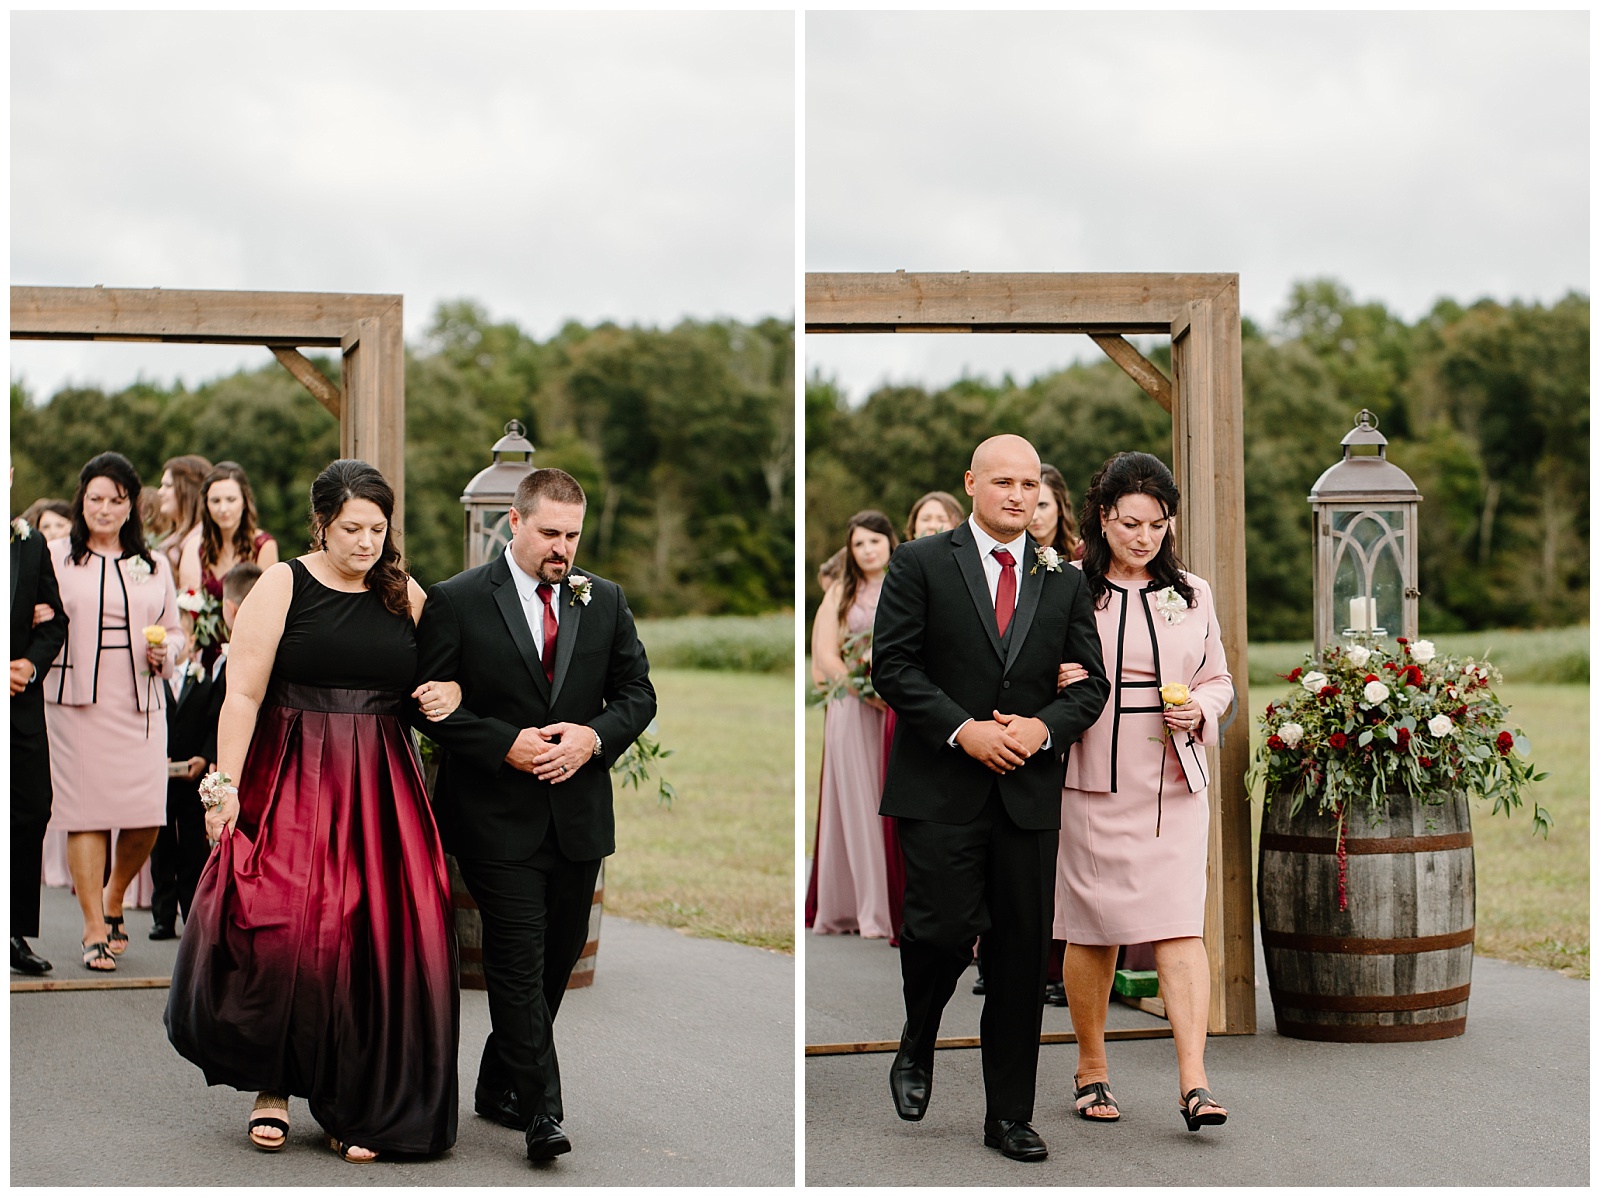 Parents of the bride and groom walking through barn doors and down the aisle at the beginning of a wedding ceremony.